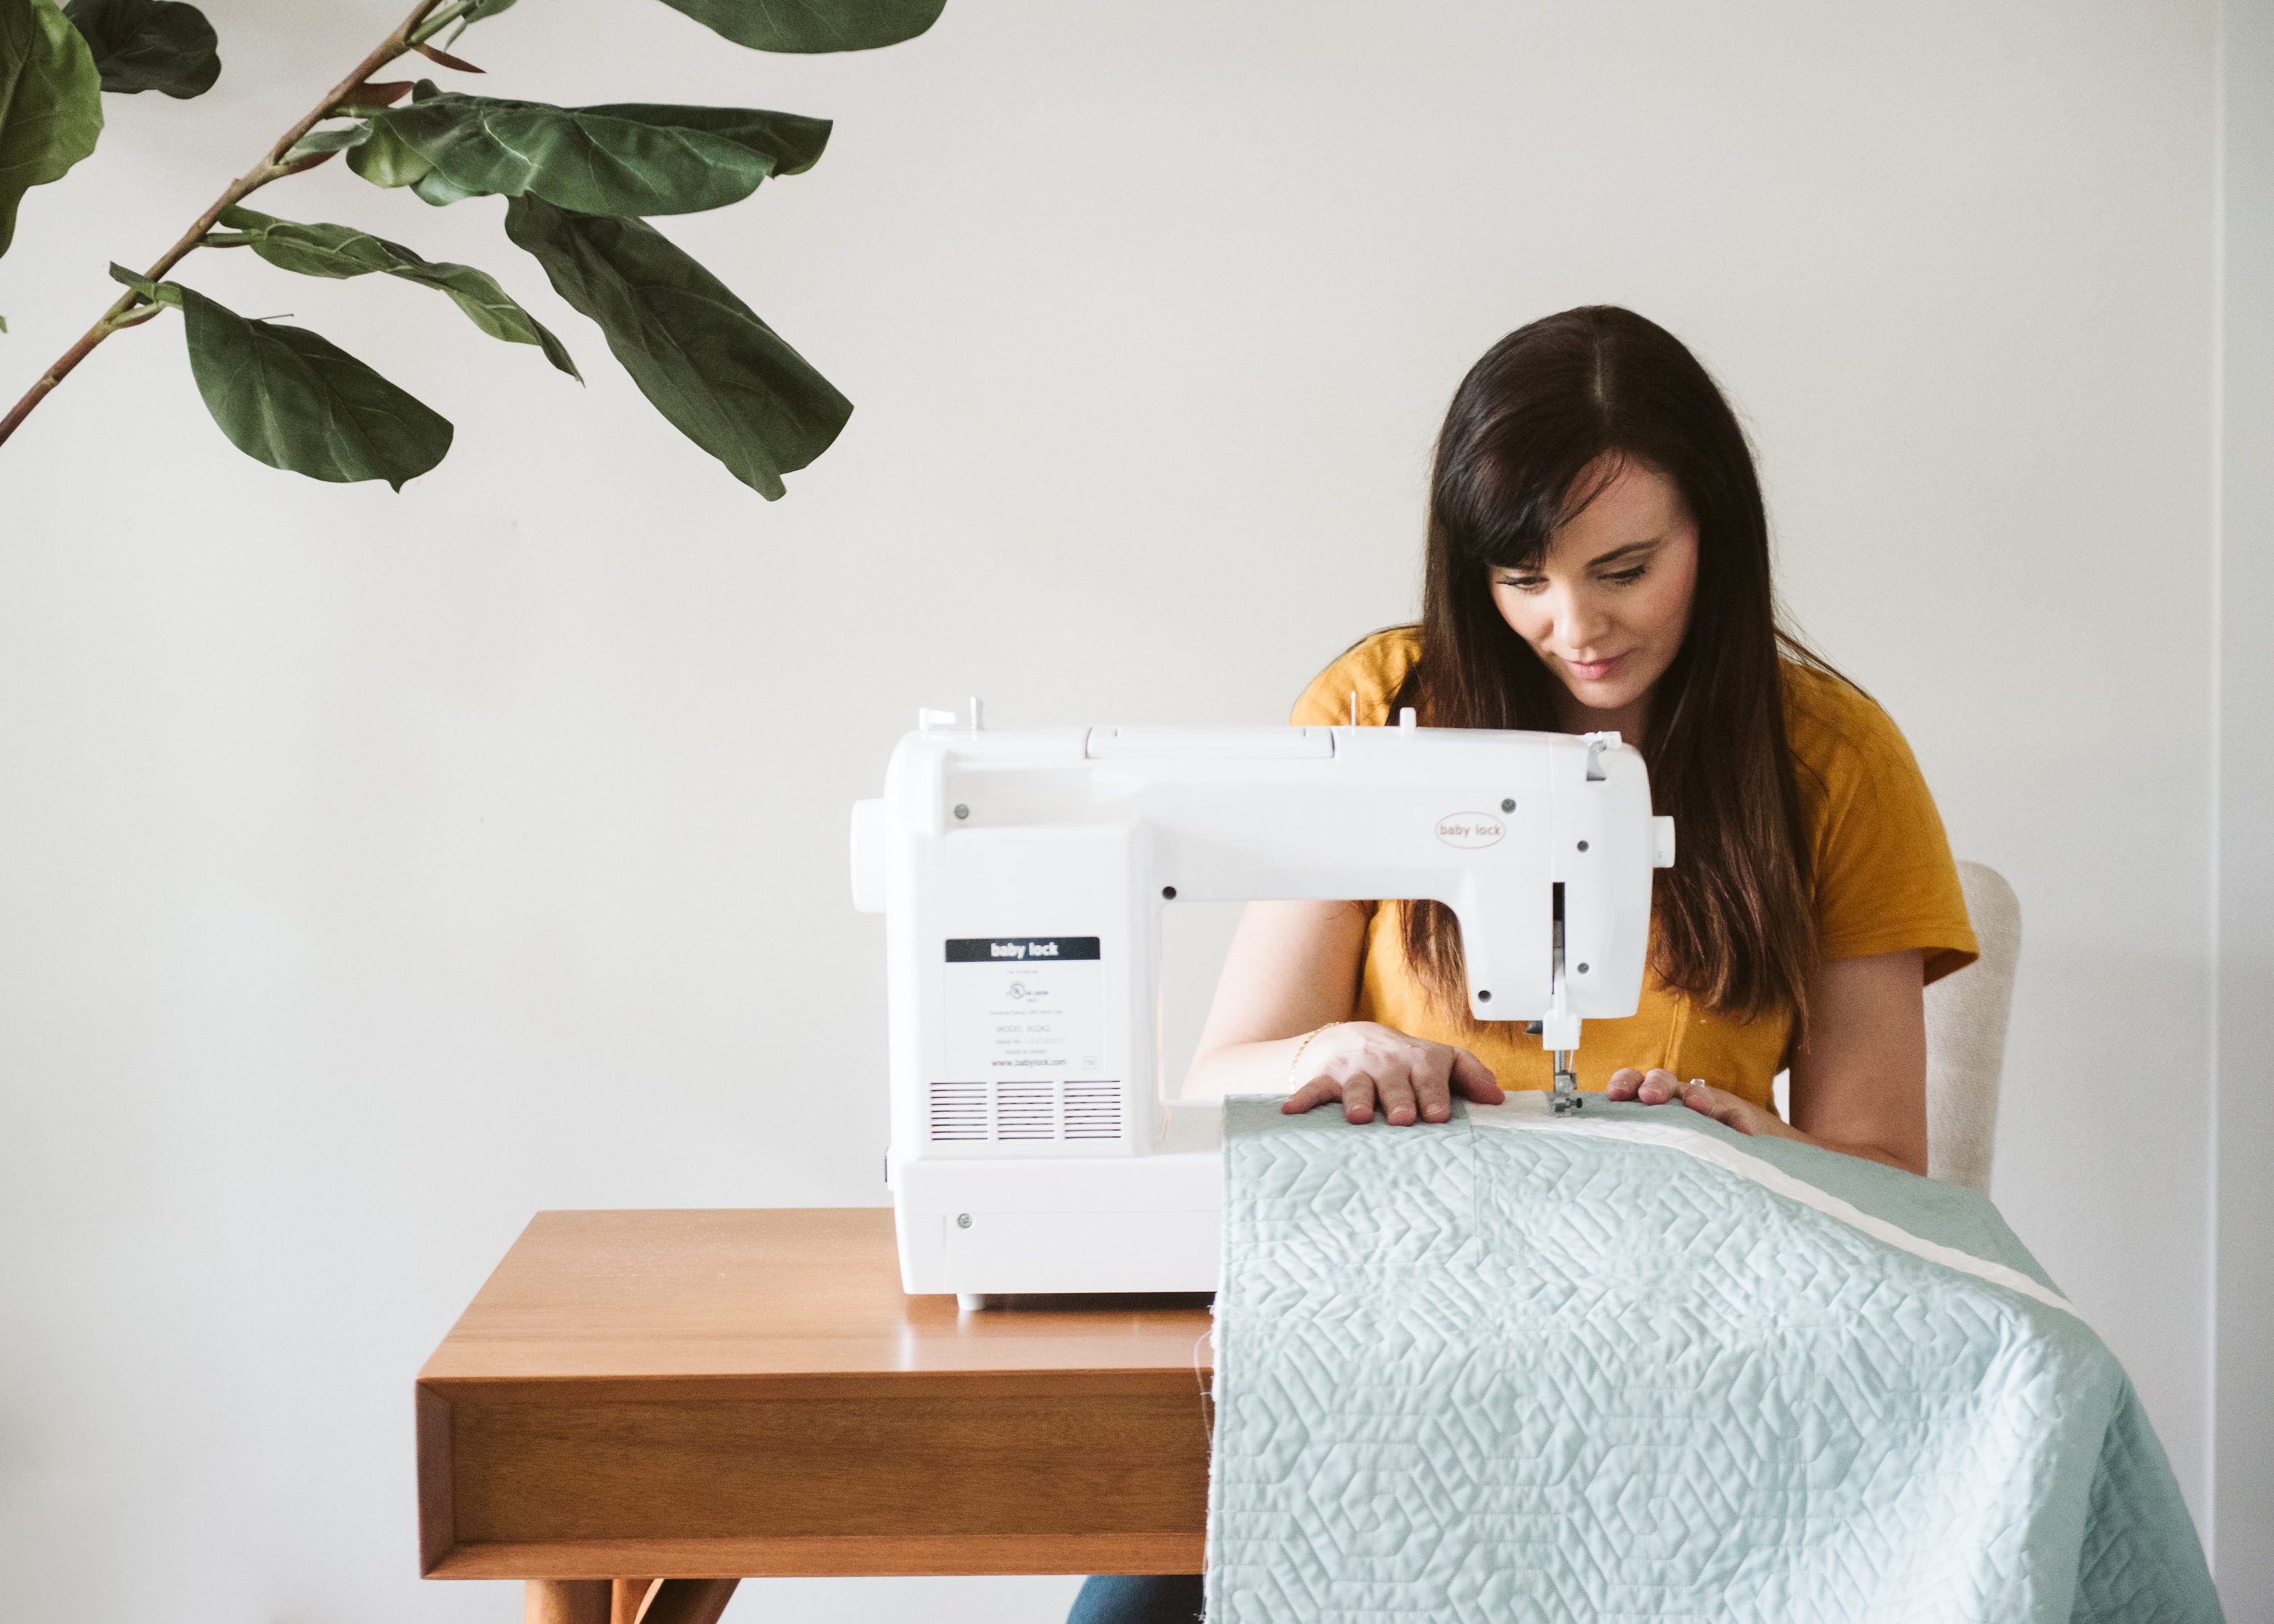 brown haired girl sewing a blue quilt on a sewing machine